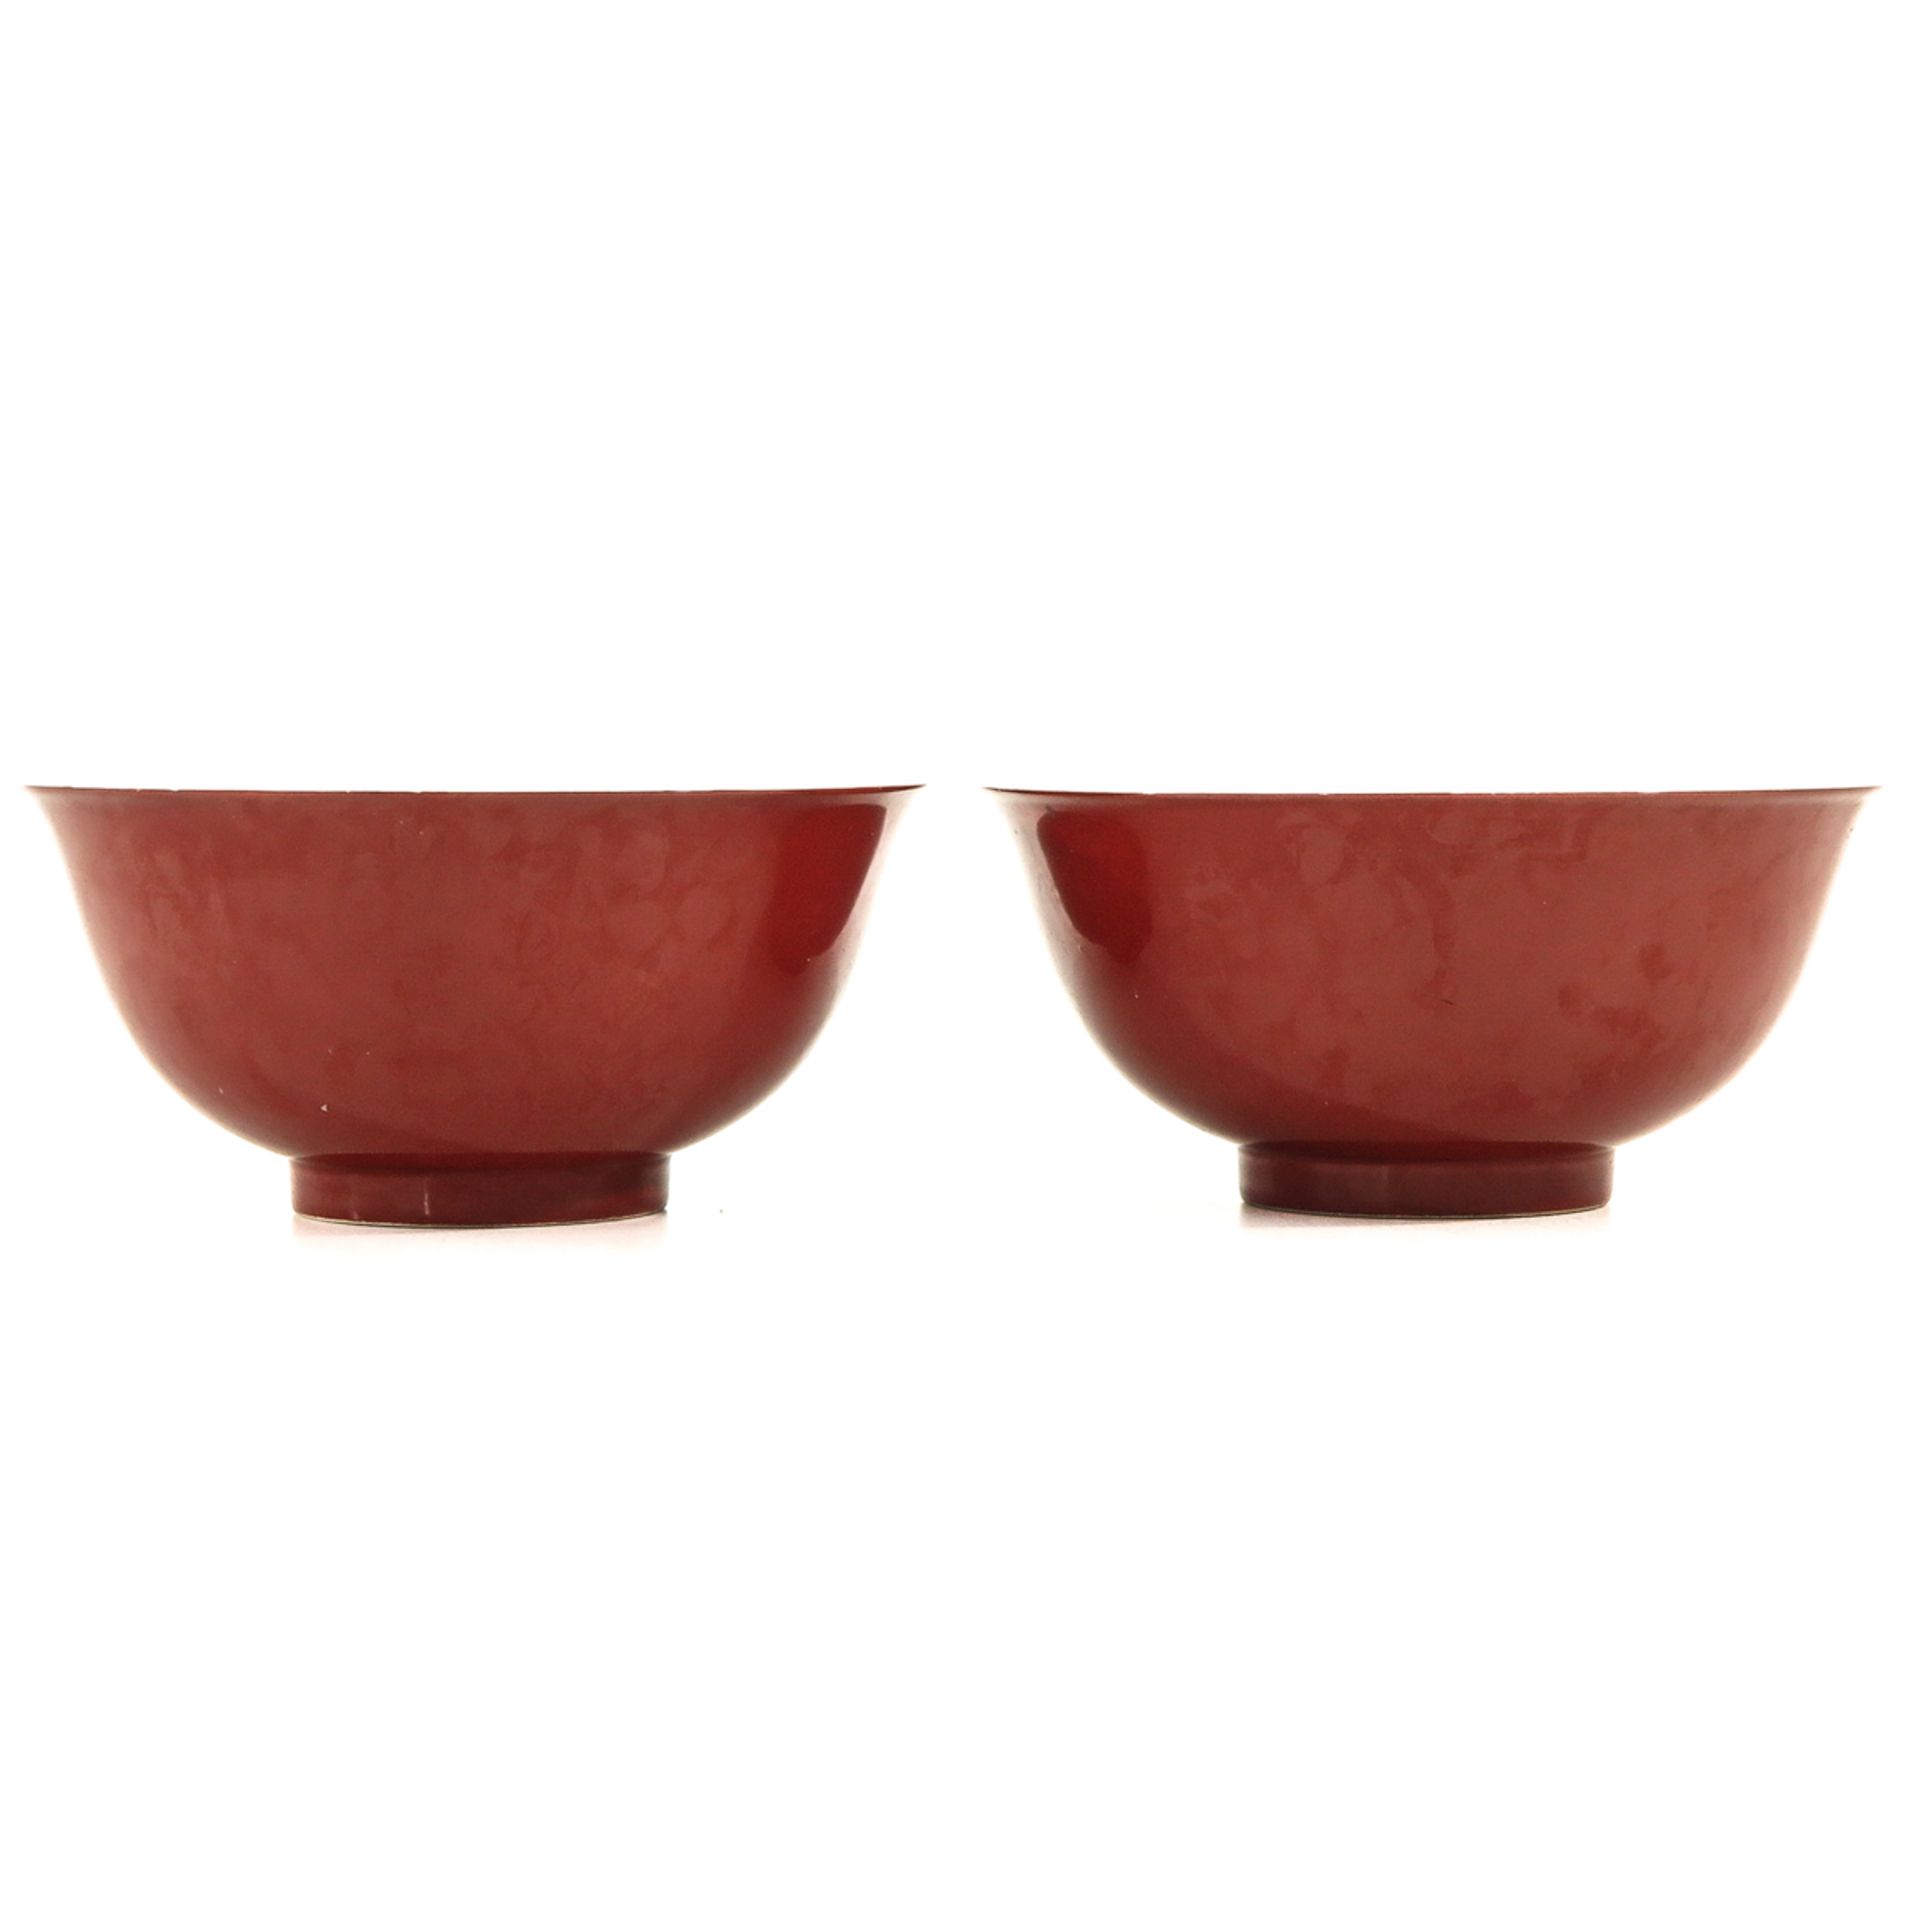 A Pair of Famille Rose Bowls - Image 4 of 10